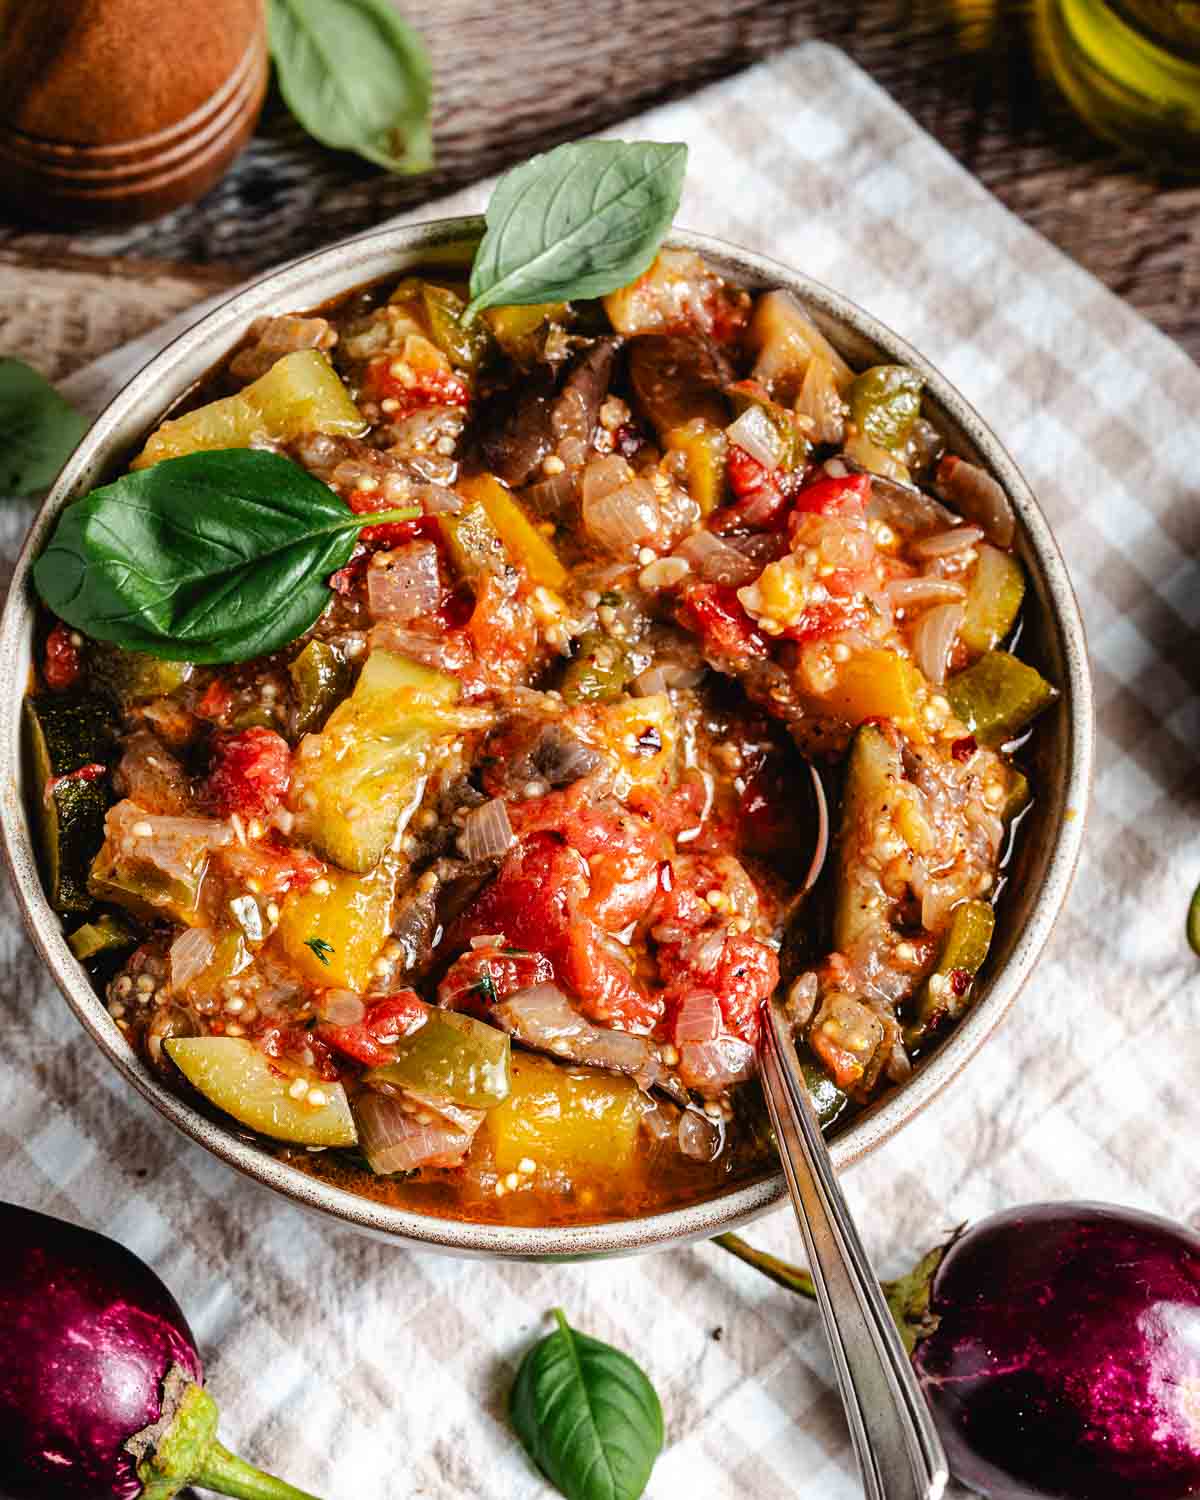 A bowl of traditional French ratatouille on gingham napkin with baby eggplants.